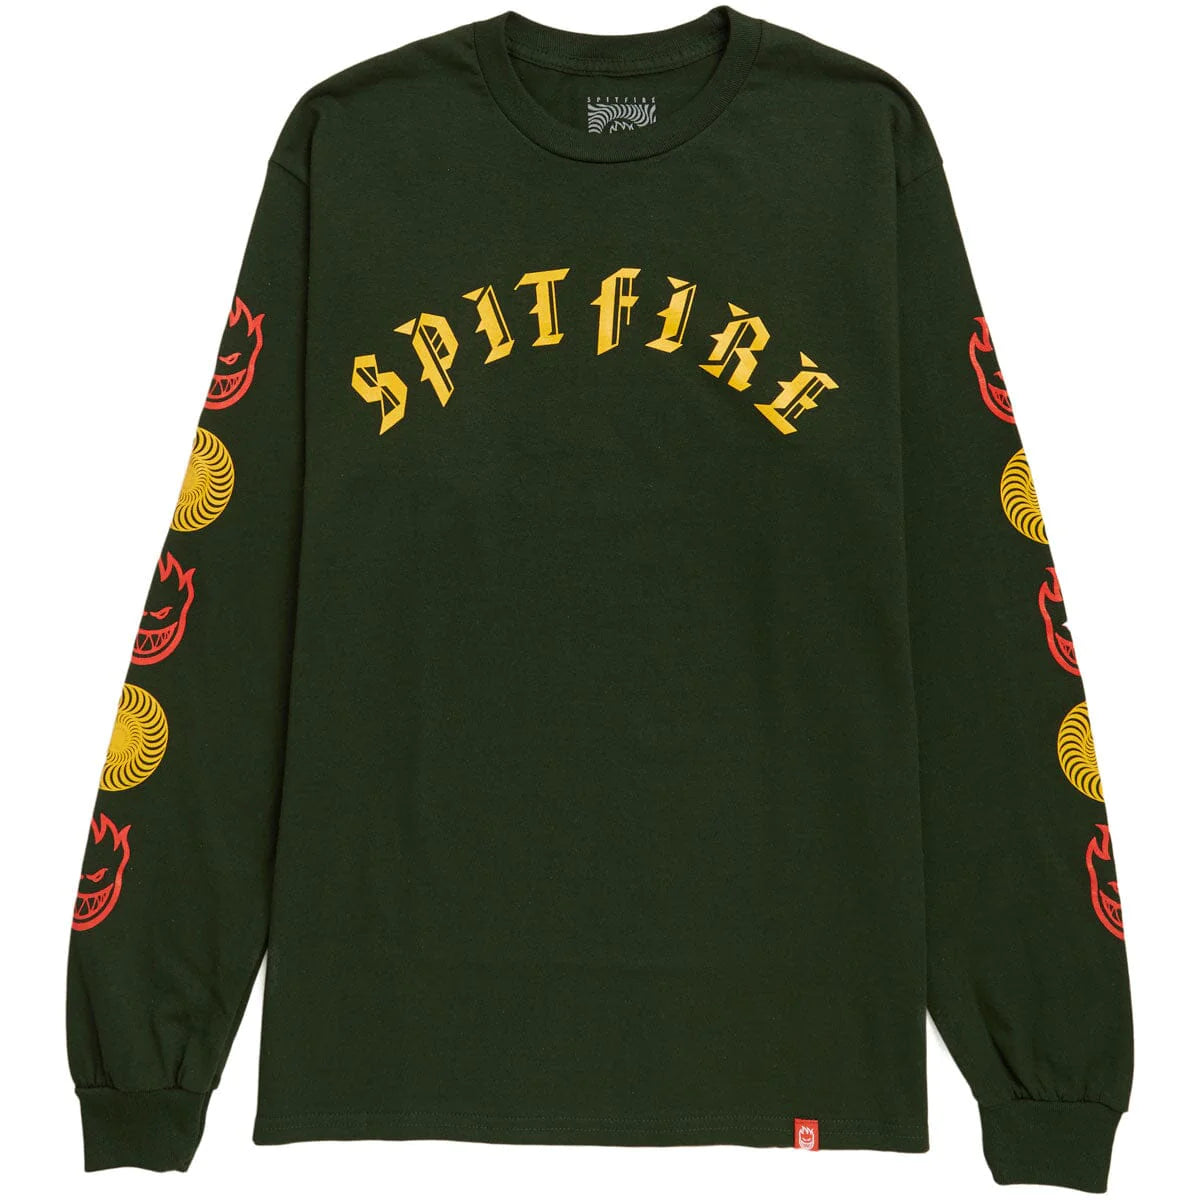 Old E Bighead Combo L/S Green (size options listed)